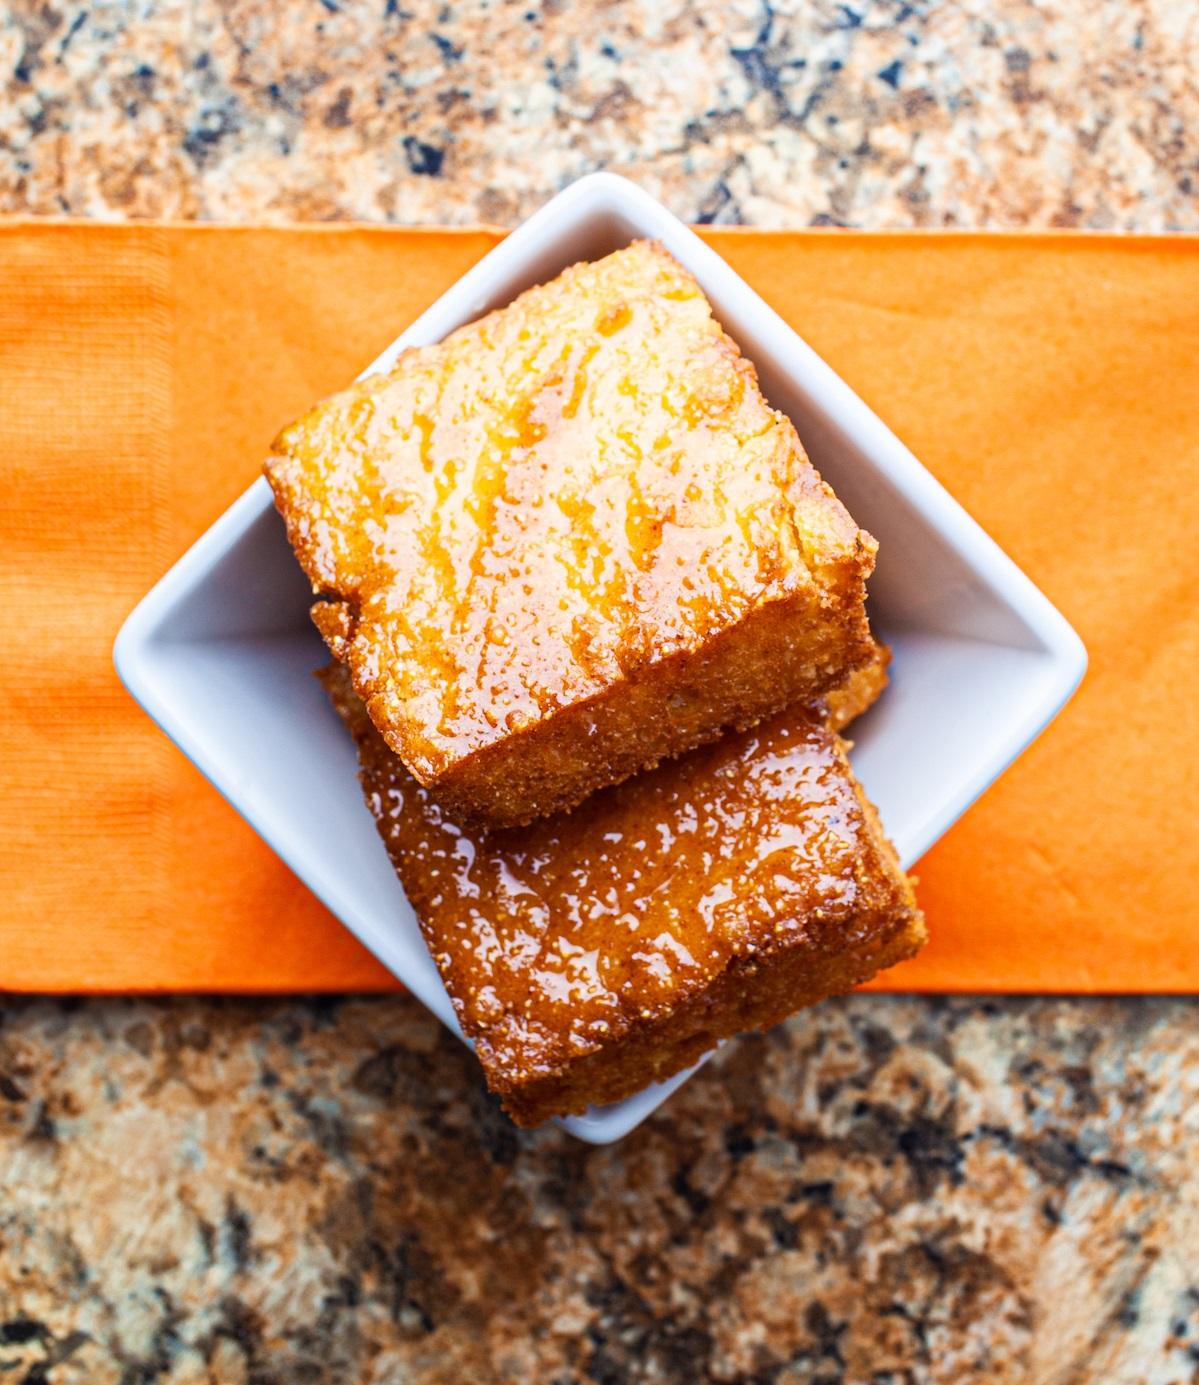 Deep-fried cornbread, drizzled with honey. (Mark Manne Photography)